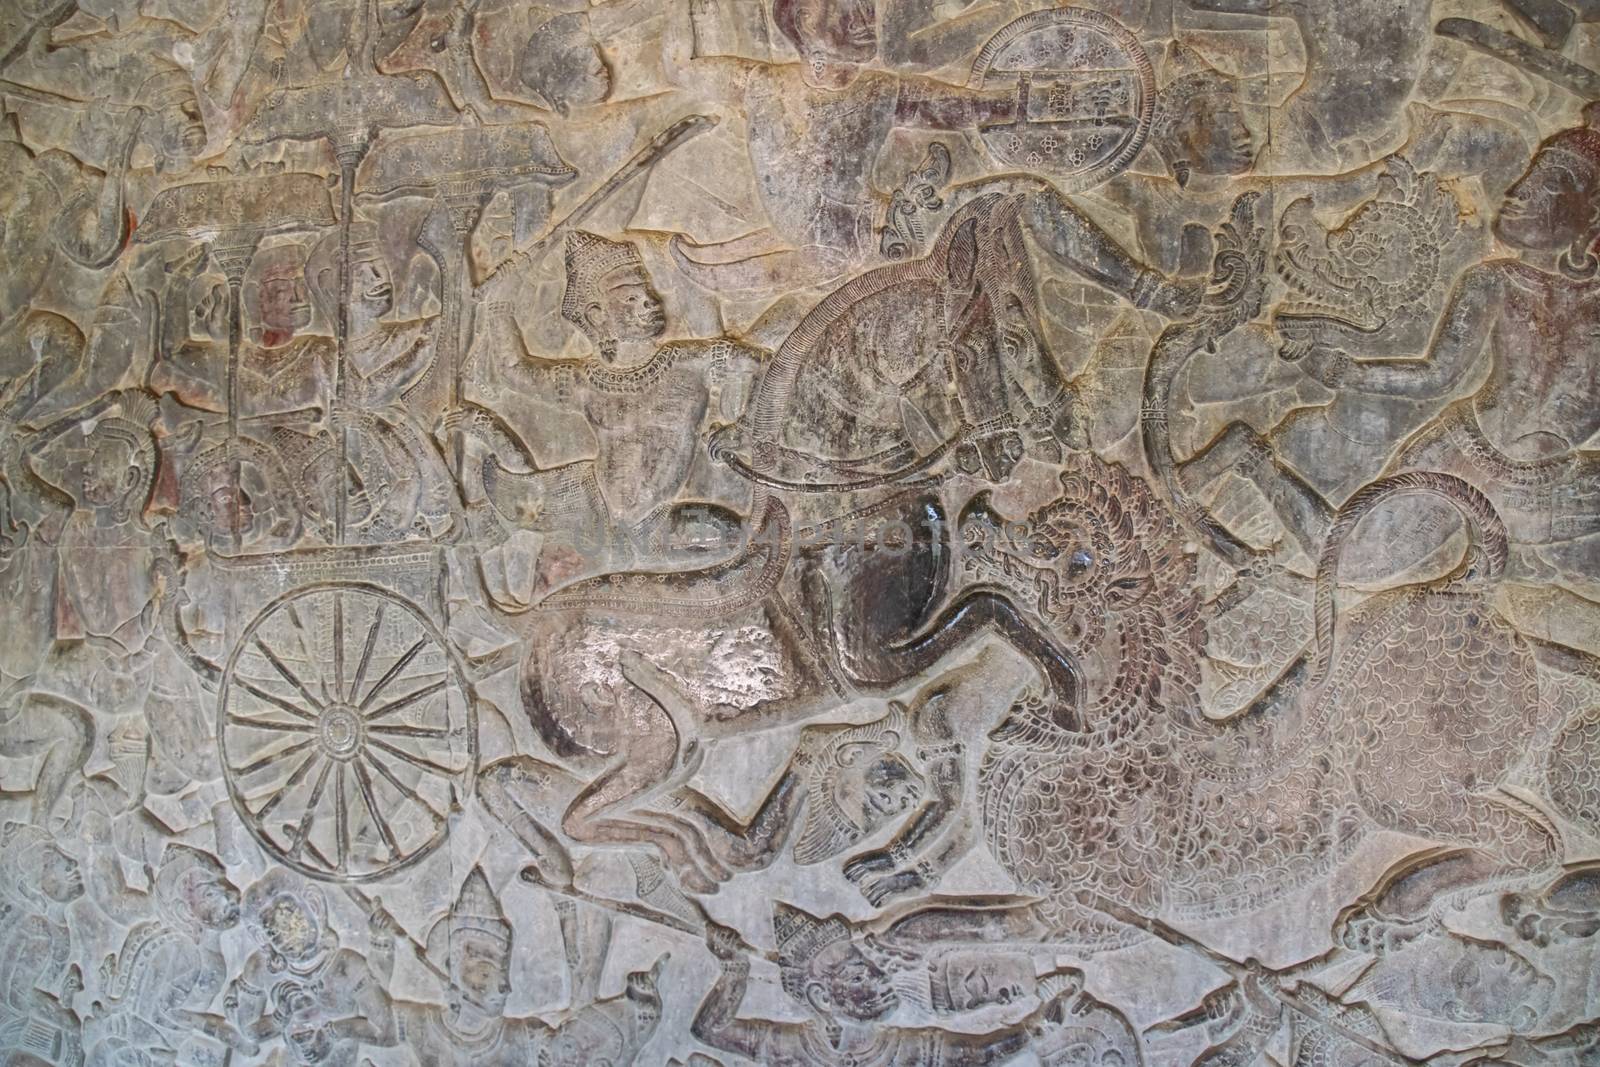 Angkor Wat, Cambodia - March 2016: Carved wall, depicting a warrior on horseback at Angkor wat. Originally constructed in the early 12th century, the ruins are a huge tourist attraction as well as a place of worship today